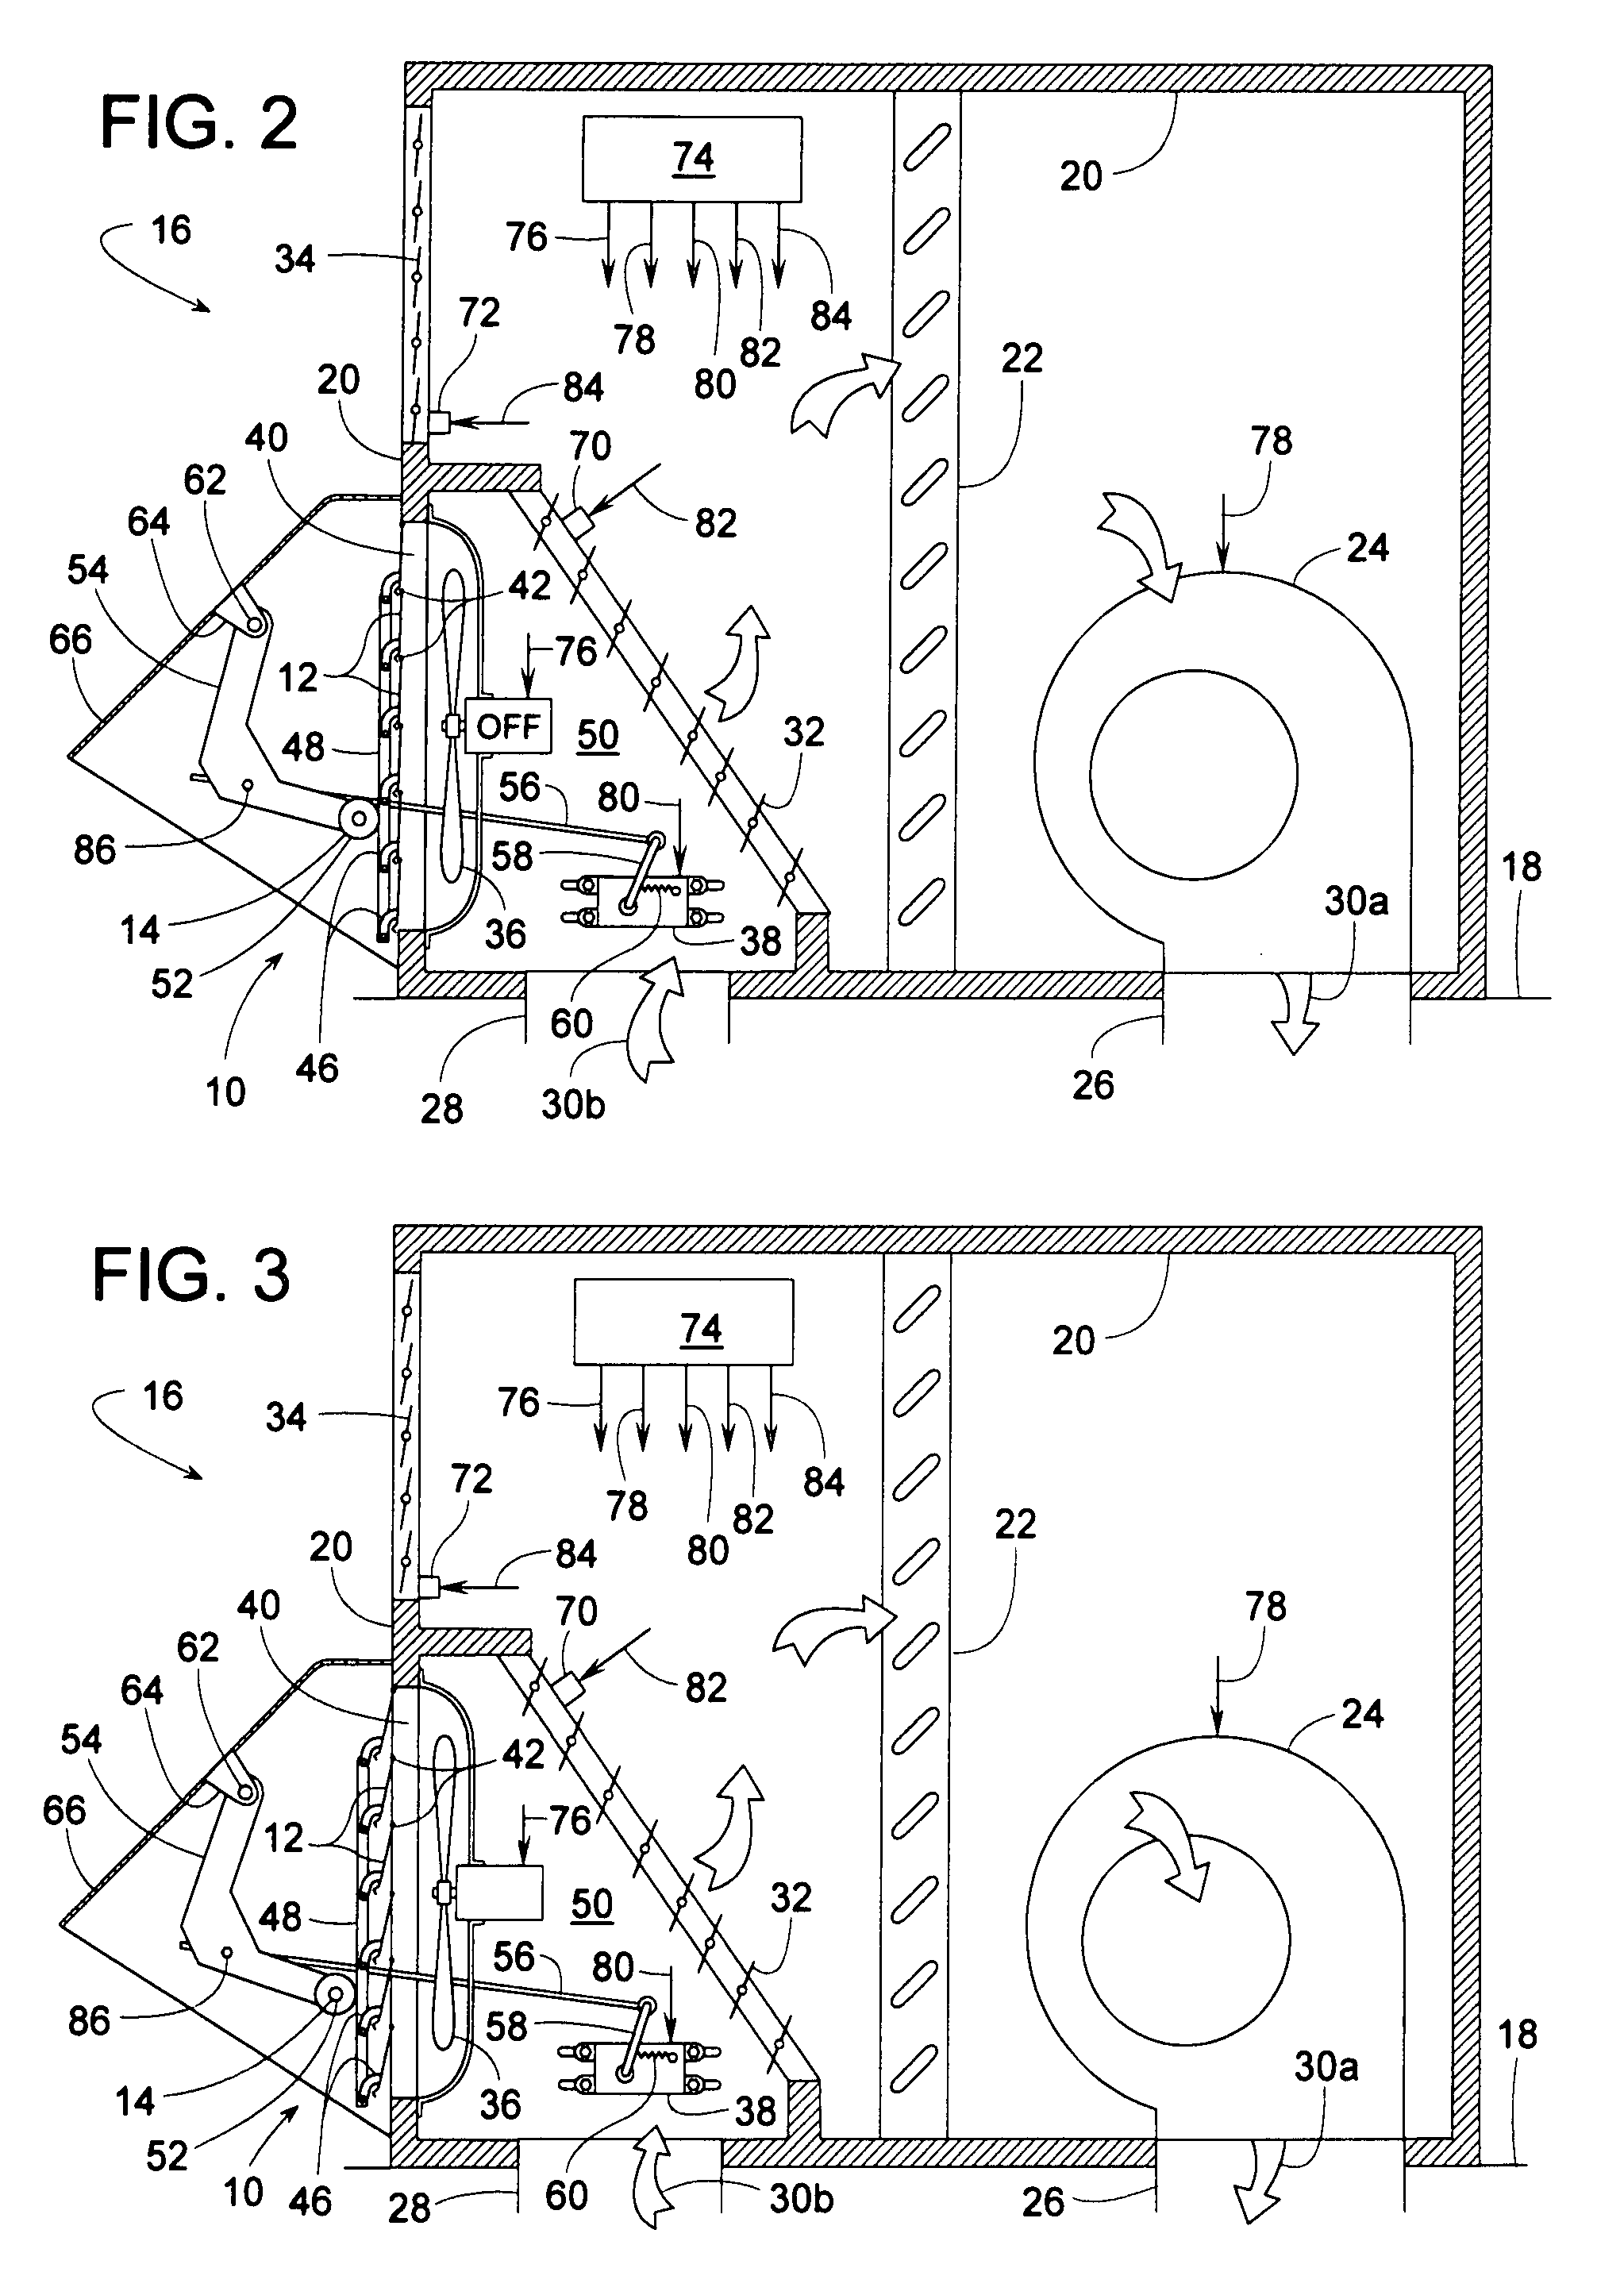 Actuator for a fan-powered damper